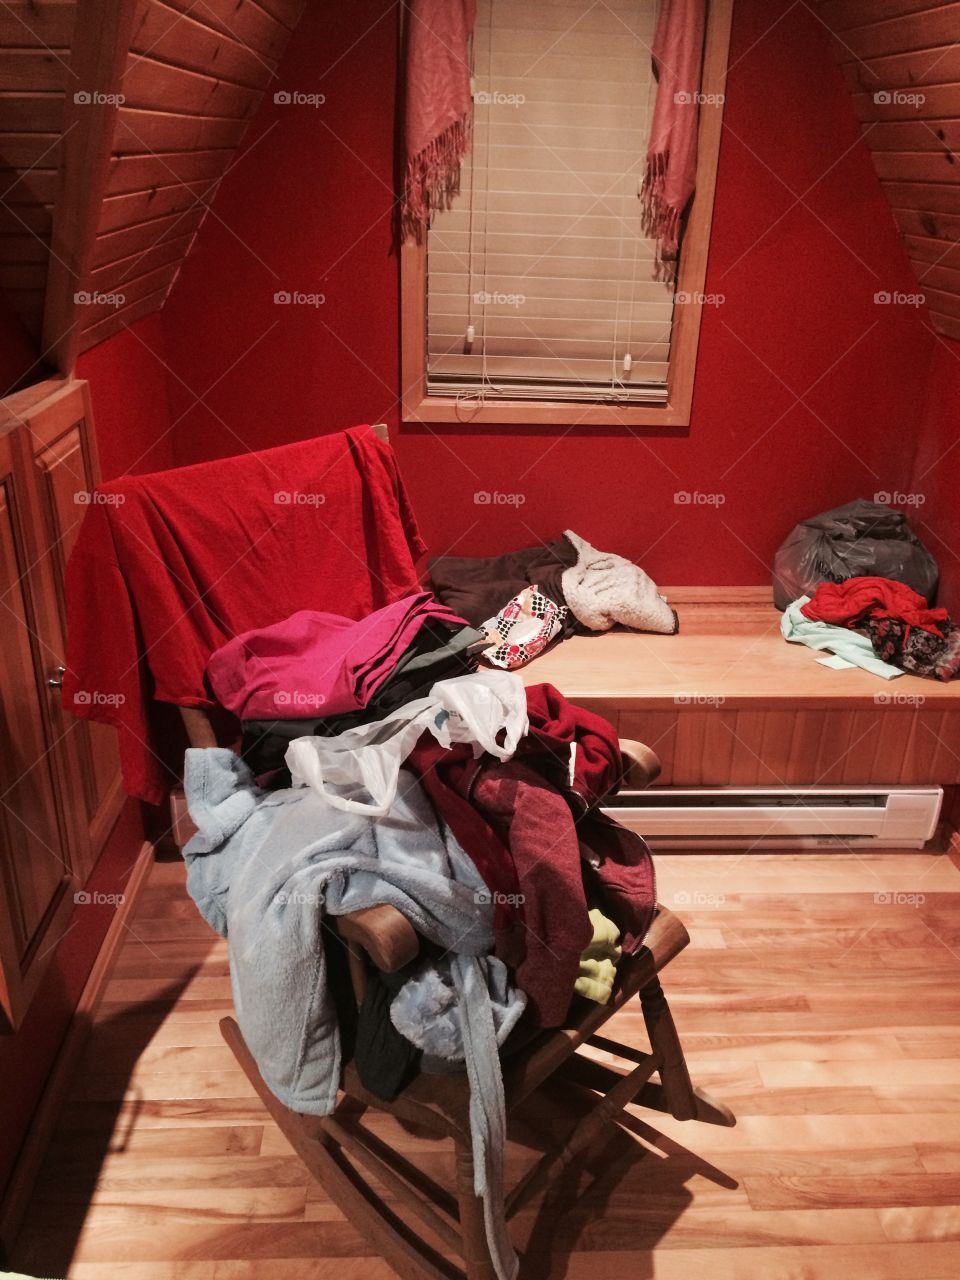 Who needs a closet when you have a perfectly good rocking chair?